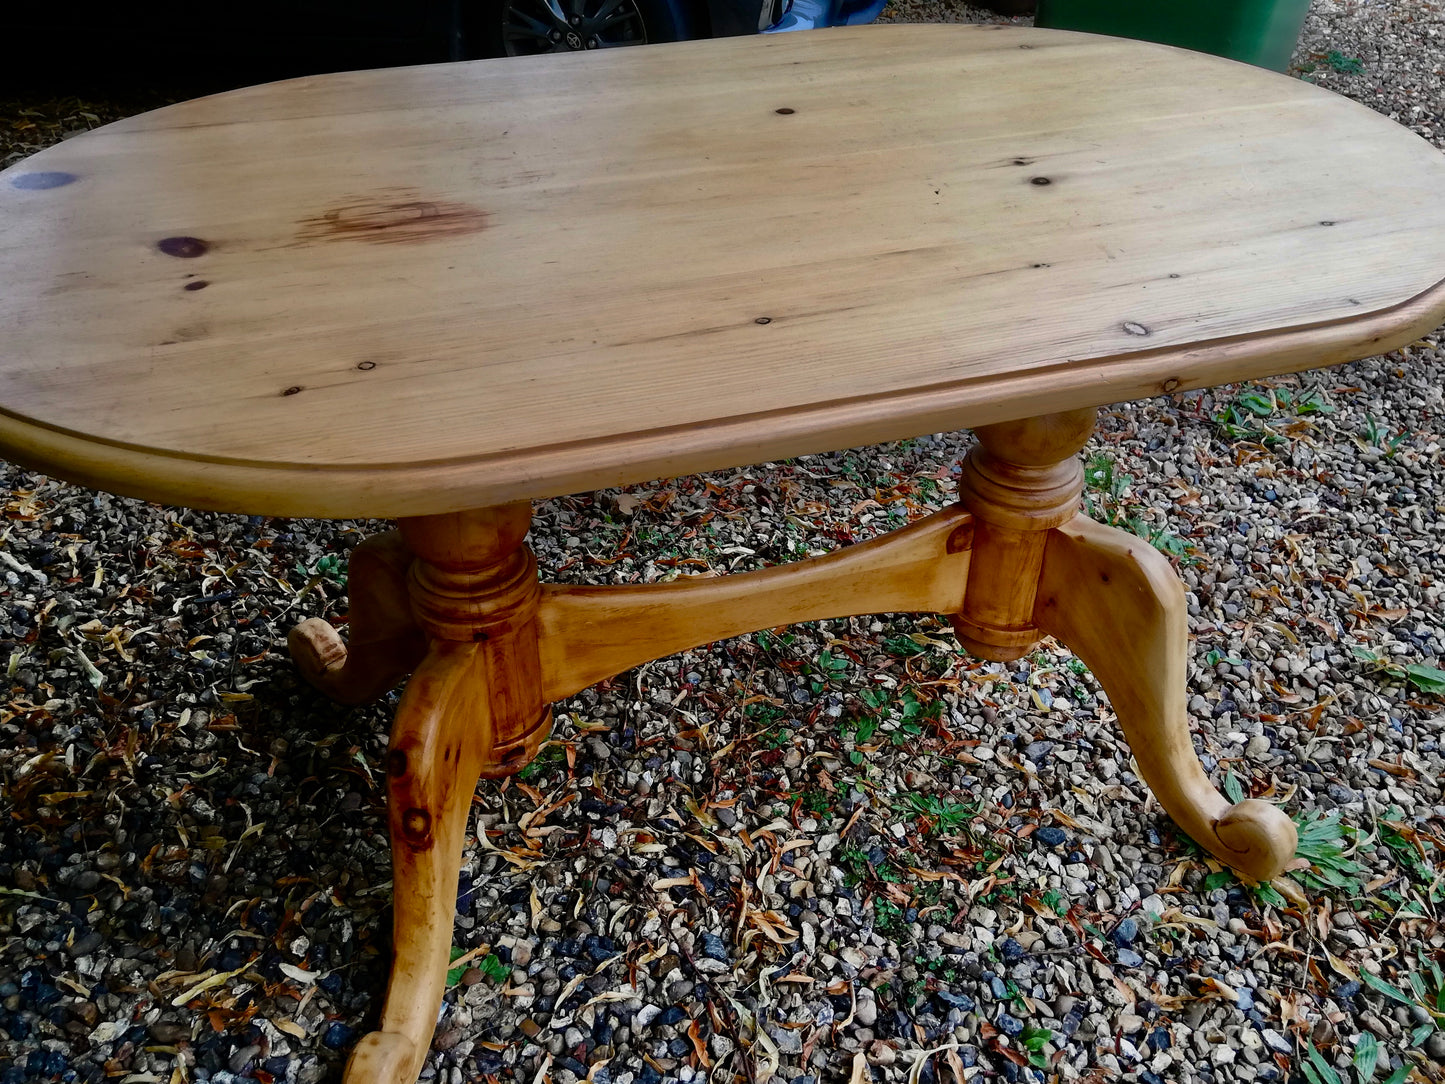 Vintage Oval  4 seater pine dining table  - to have it painted please contact me to discuss what you would like.